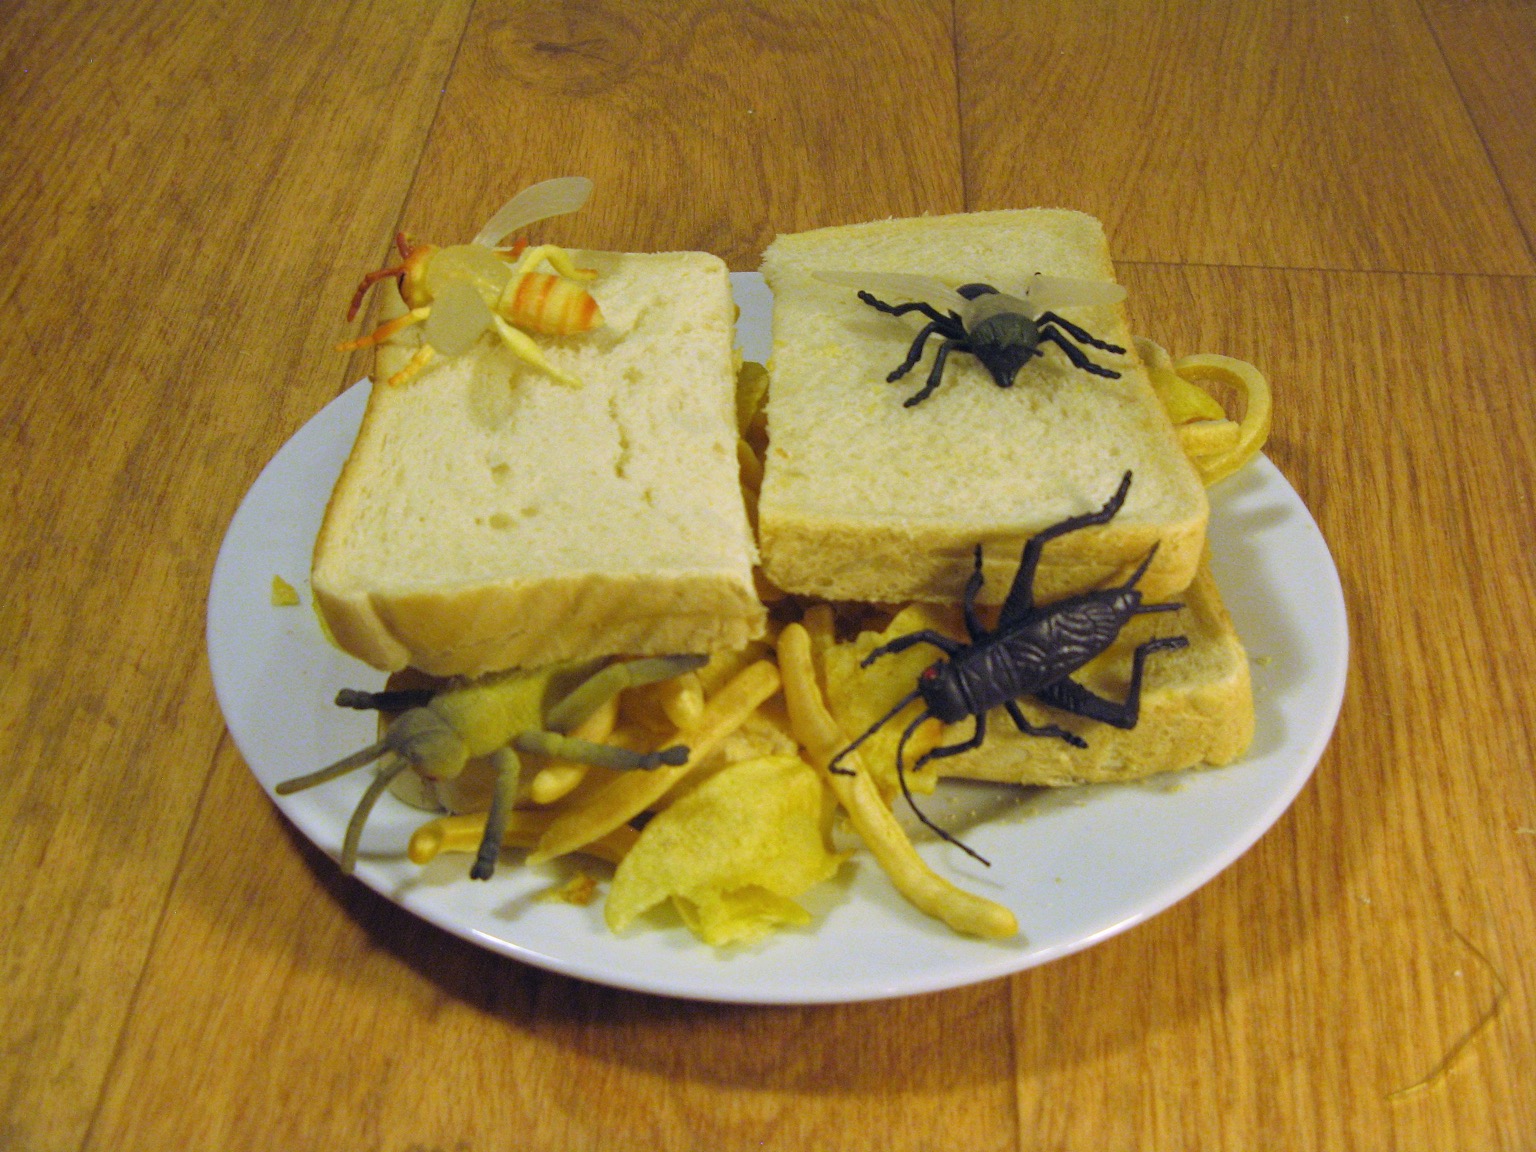 Halved sandwich covered with plastic insects